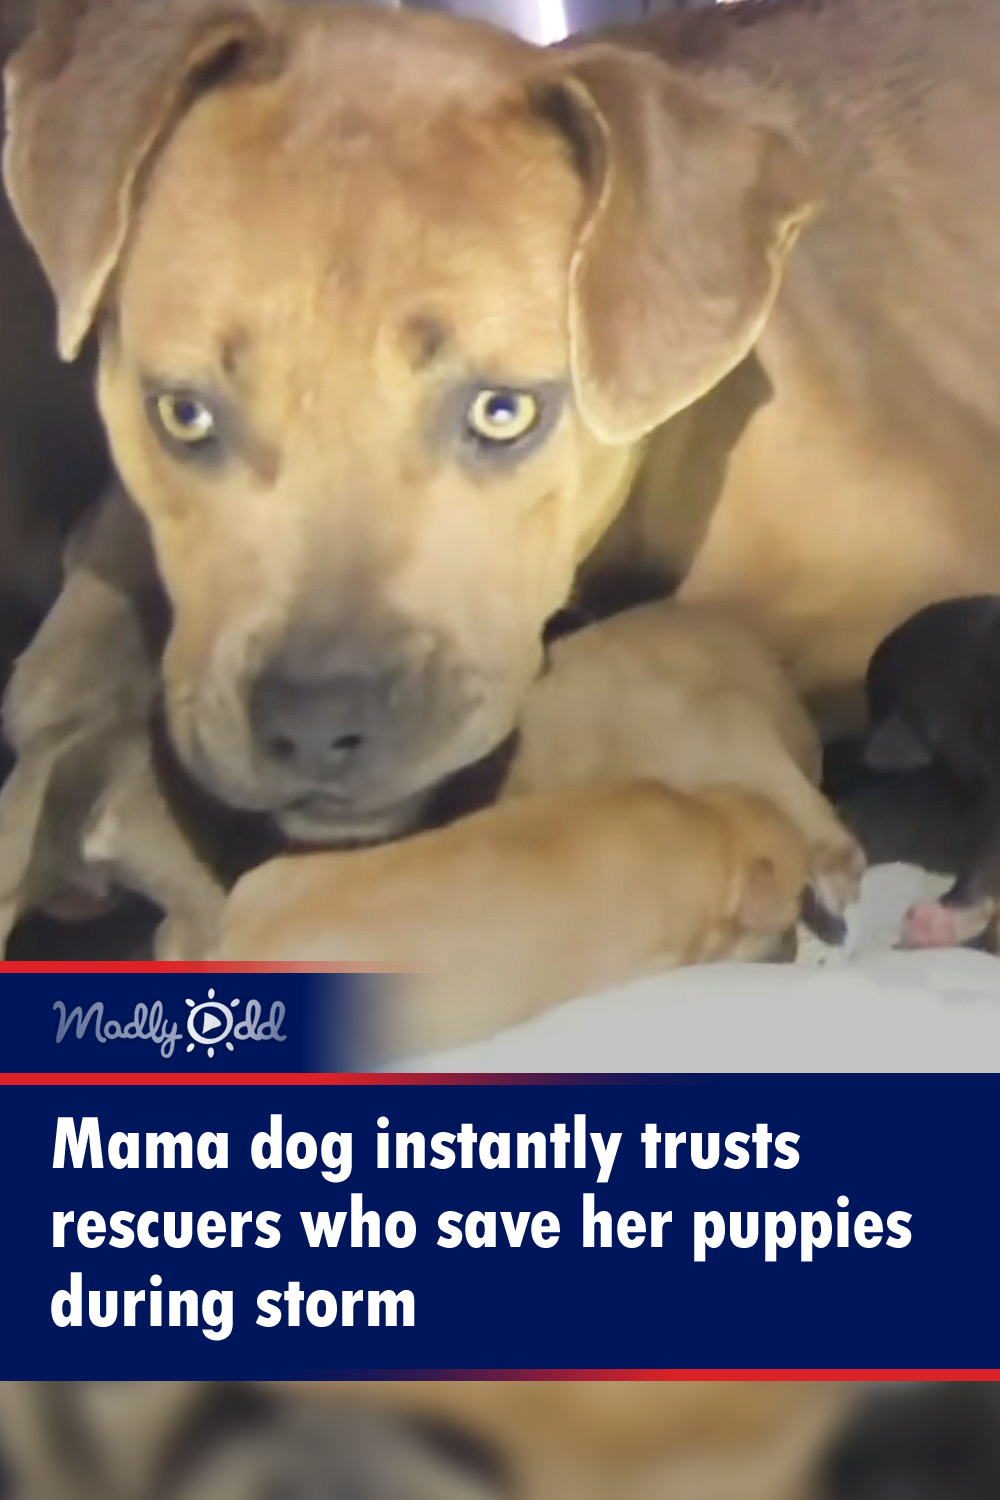 Mama dog instantly trusts rescuers who save her puppies during storm